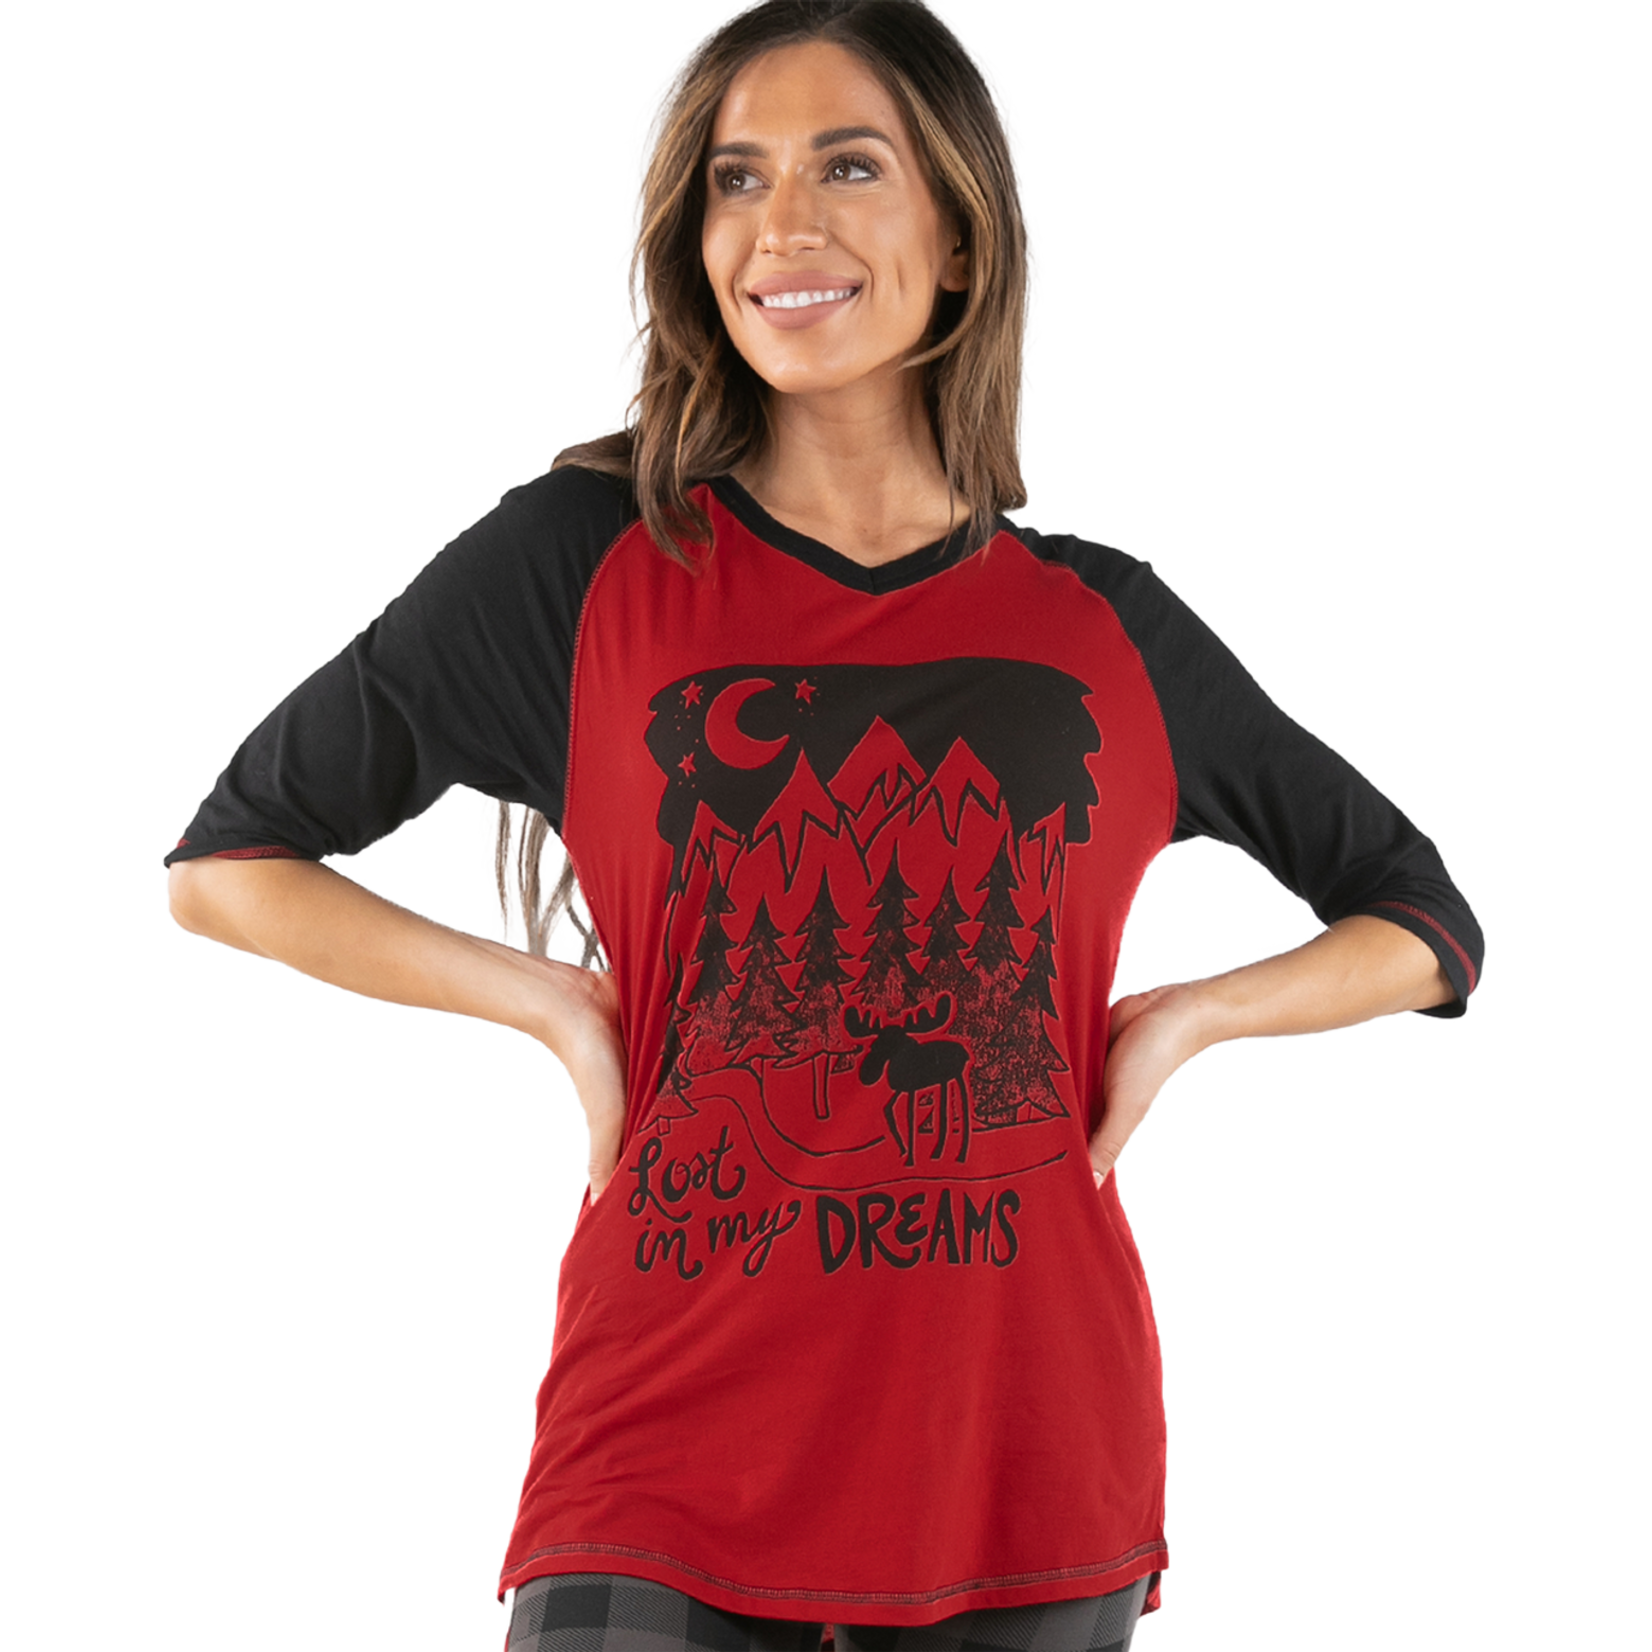 Lazy One (DNR) Lost in My Dreams Women's Tall Tee